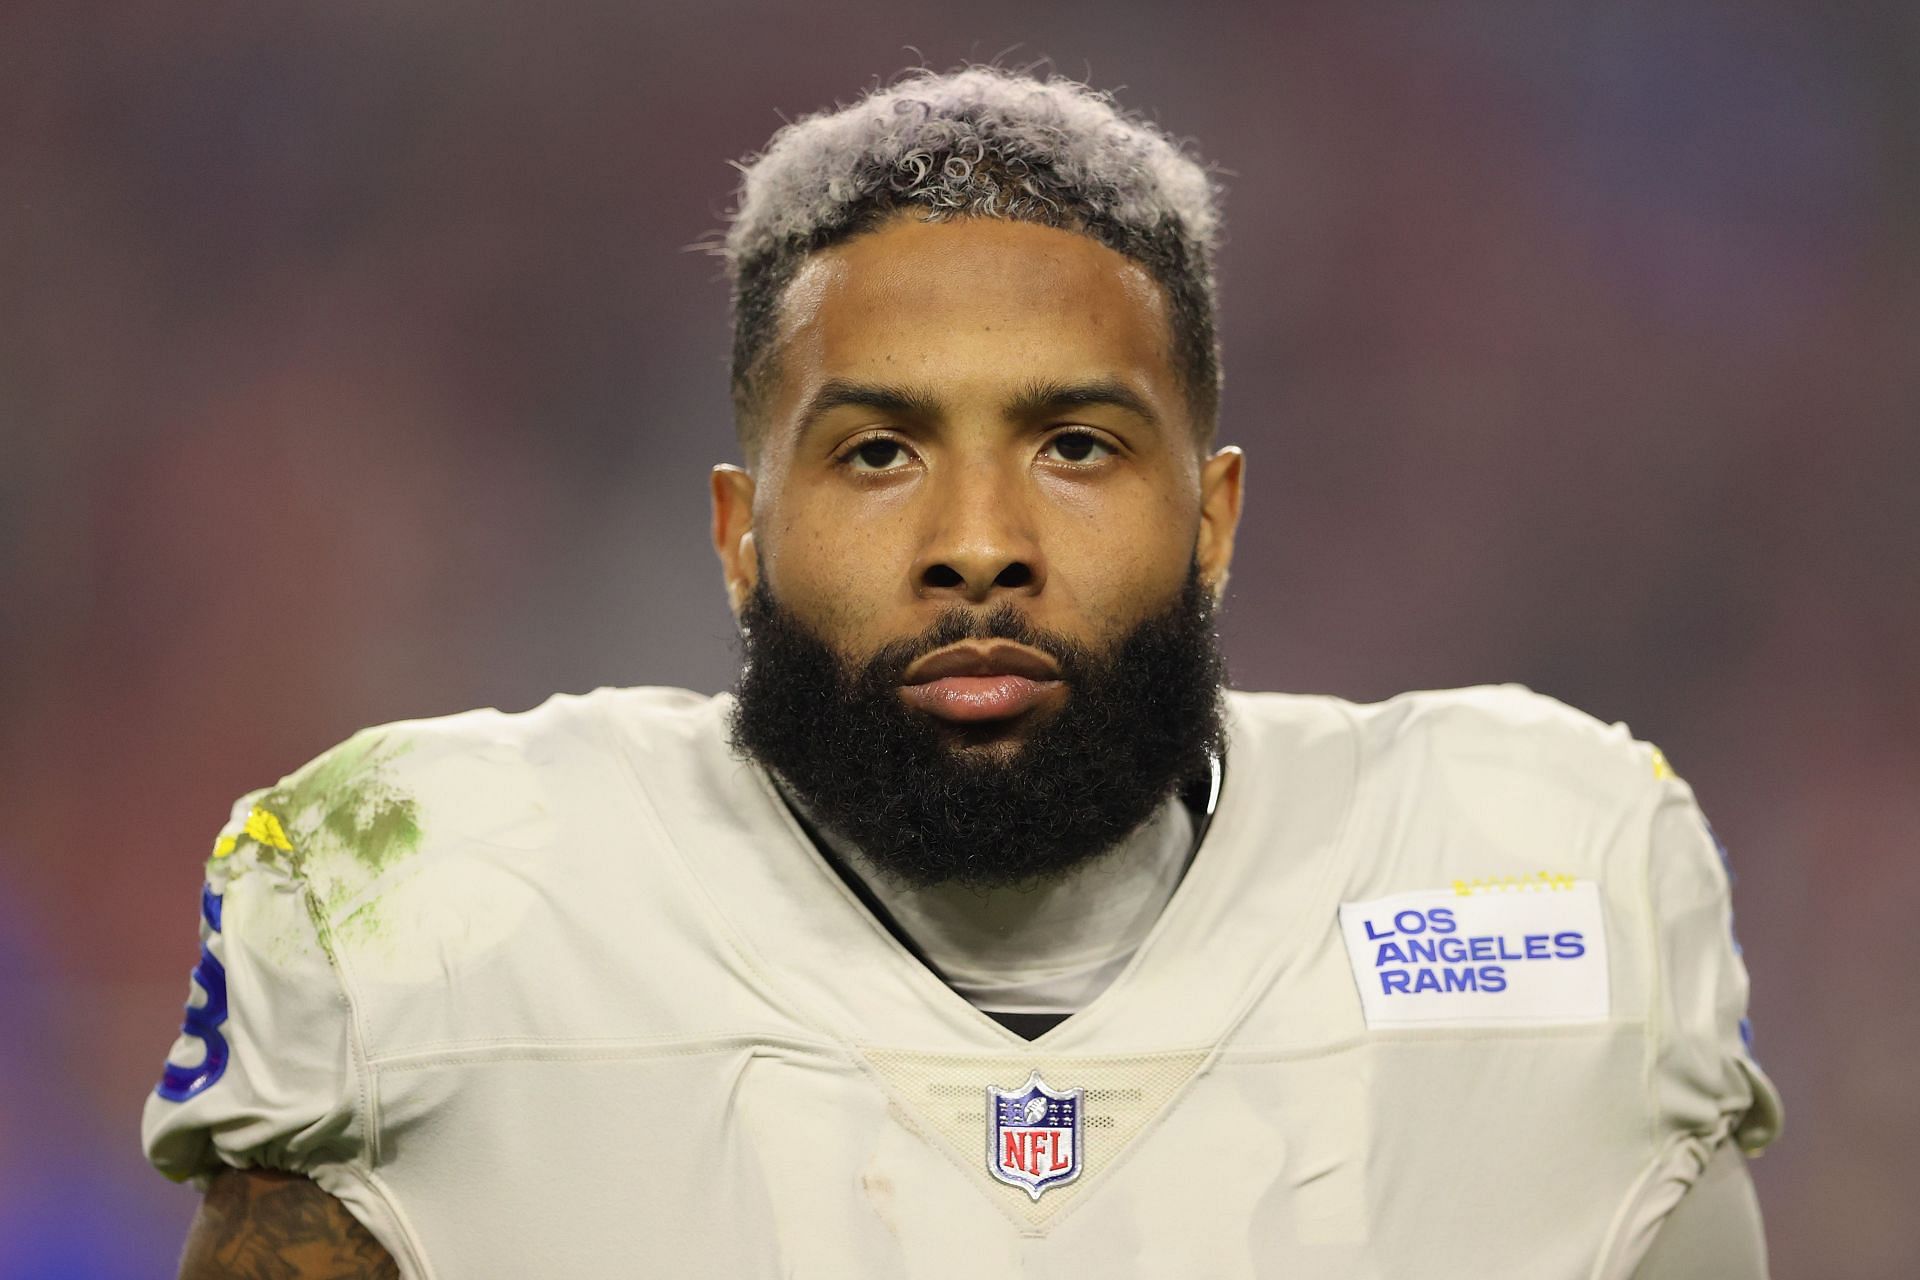 Why did Odell Beckham Jr. sign with the Ravens?